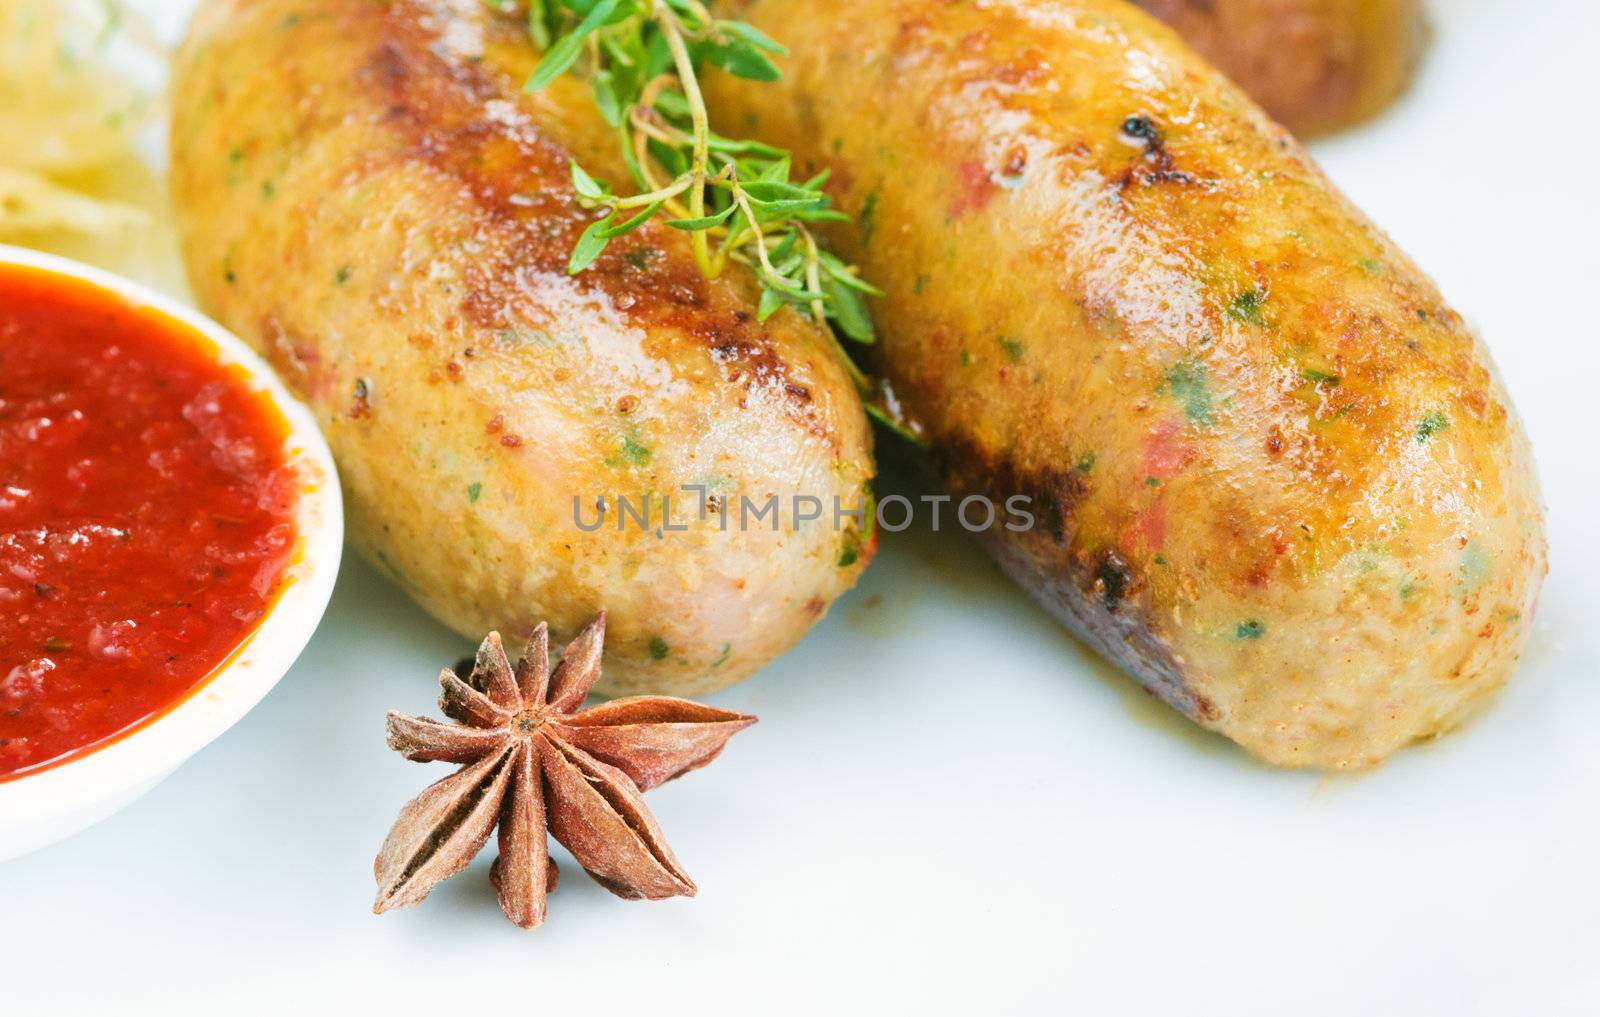 grilled sausages by shivanetua